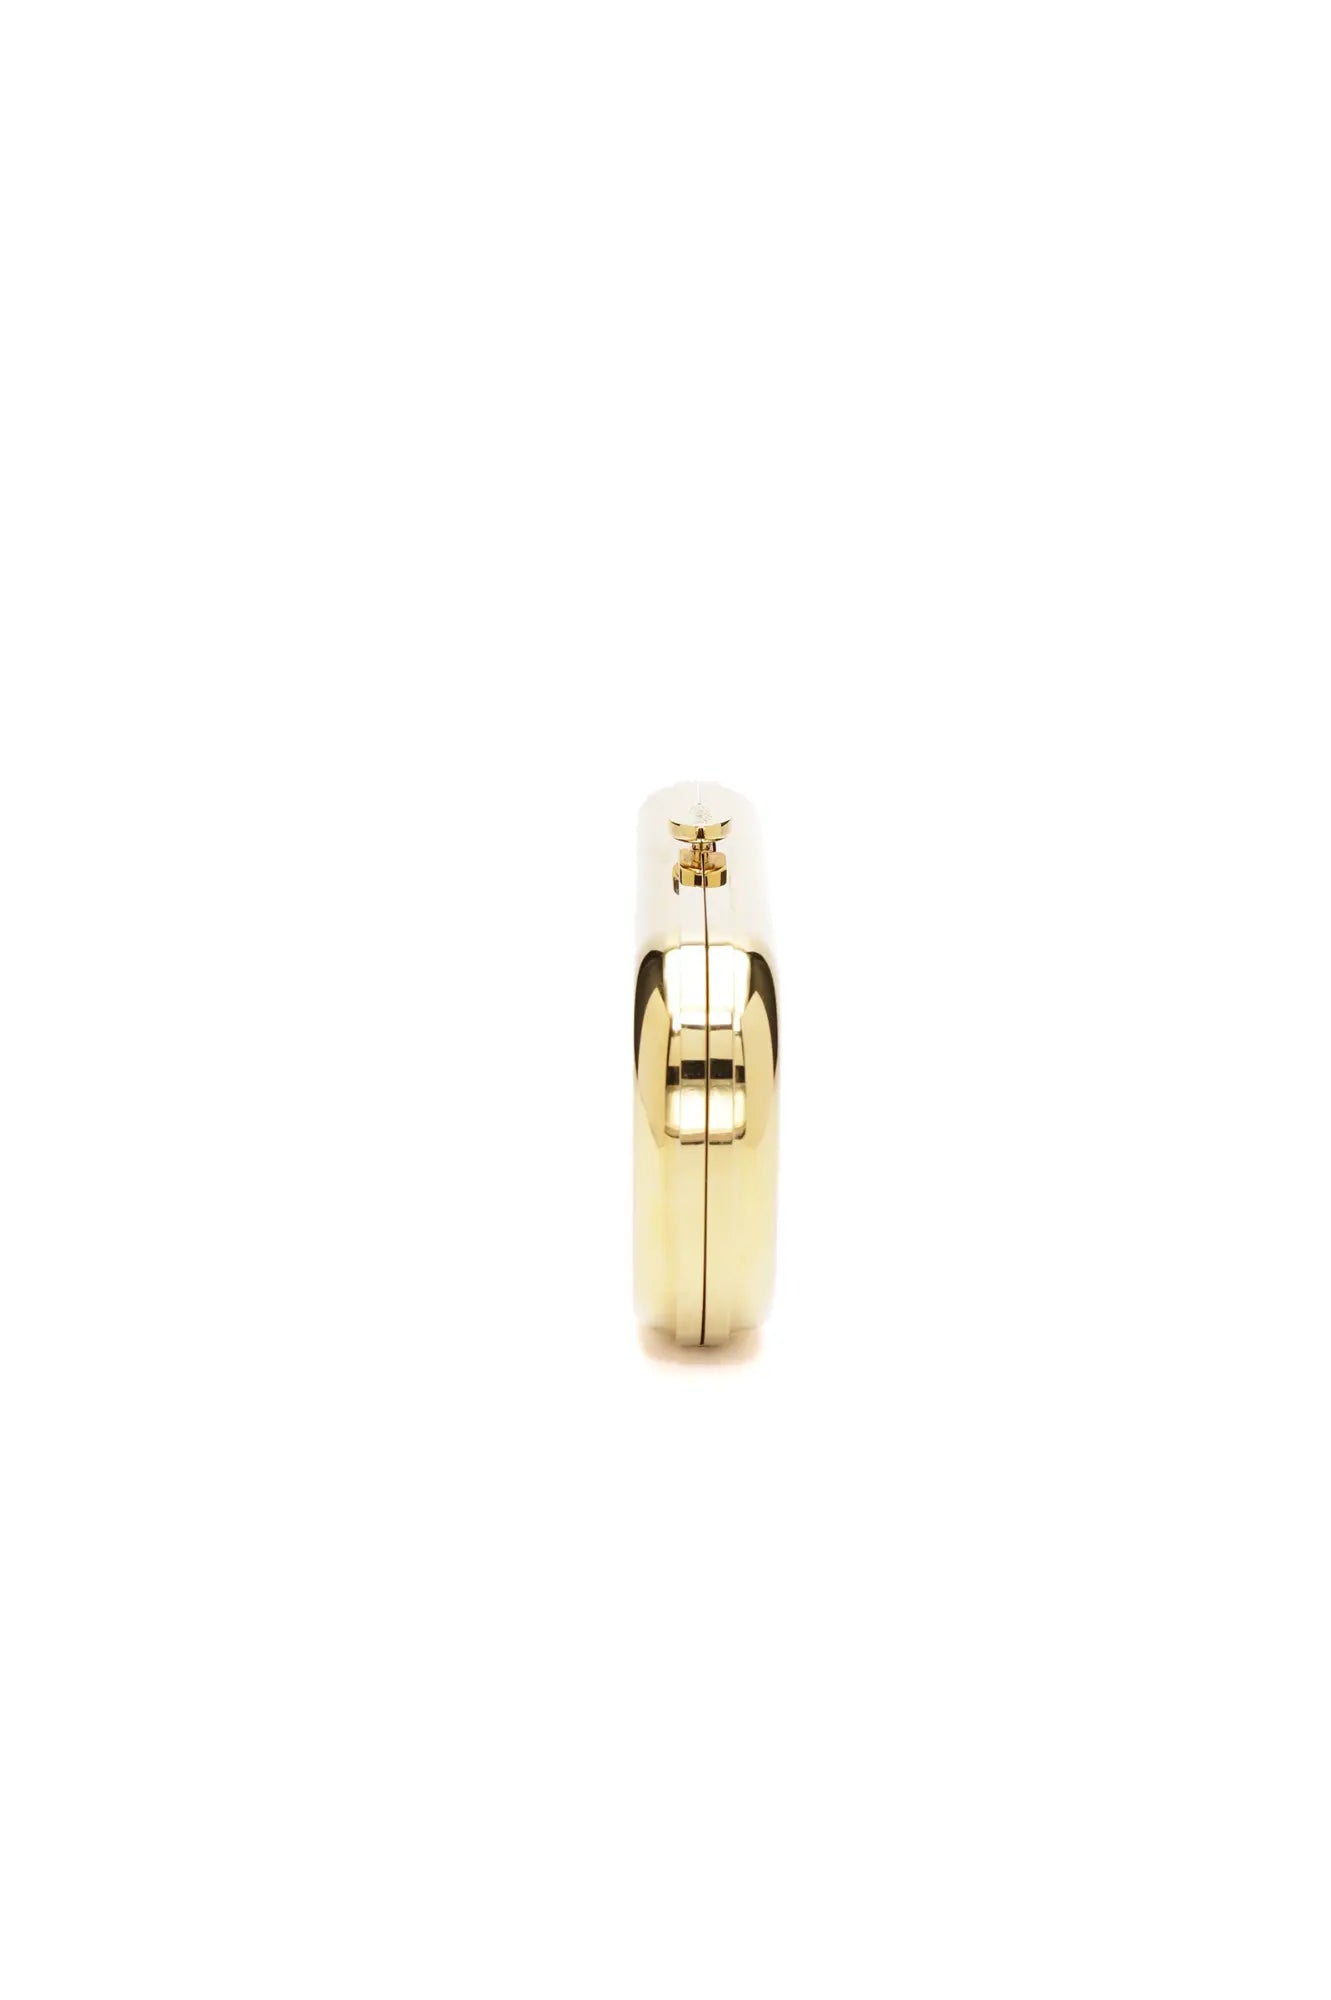 Golden Bella Clutch padlock on a white background with an engraved sentiment plaque, part of The Bella Rosa Collection.